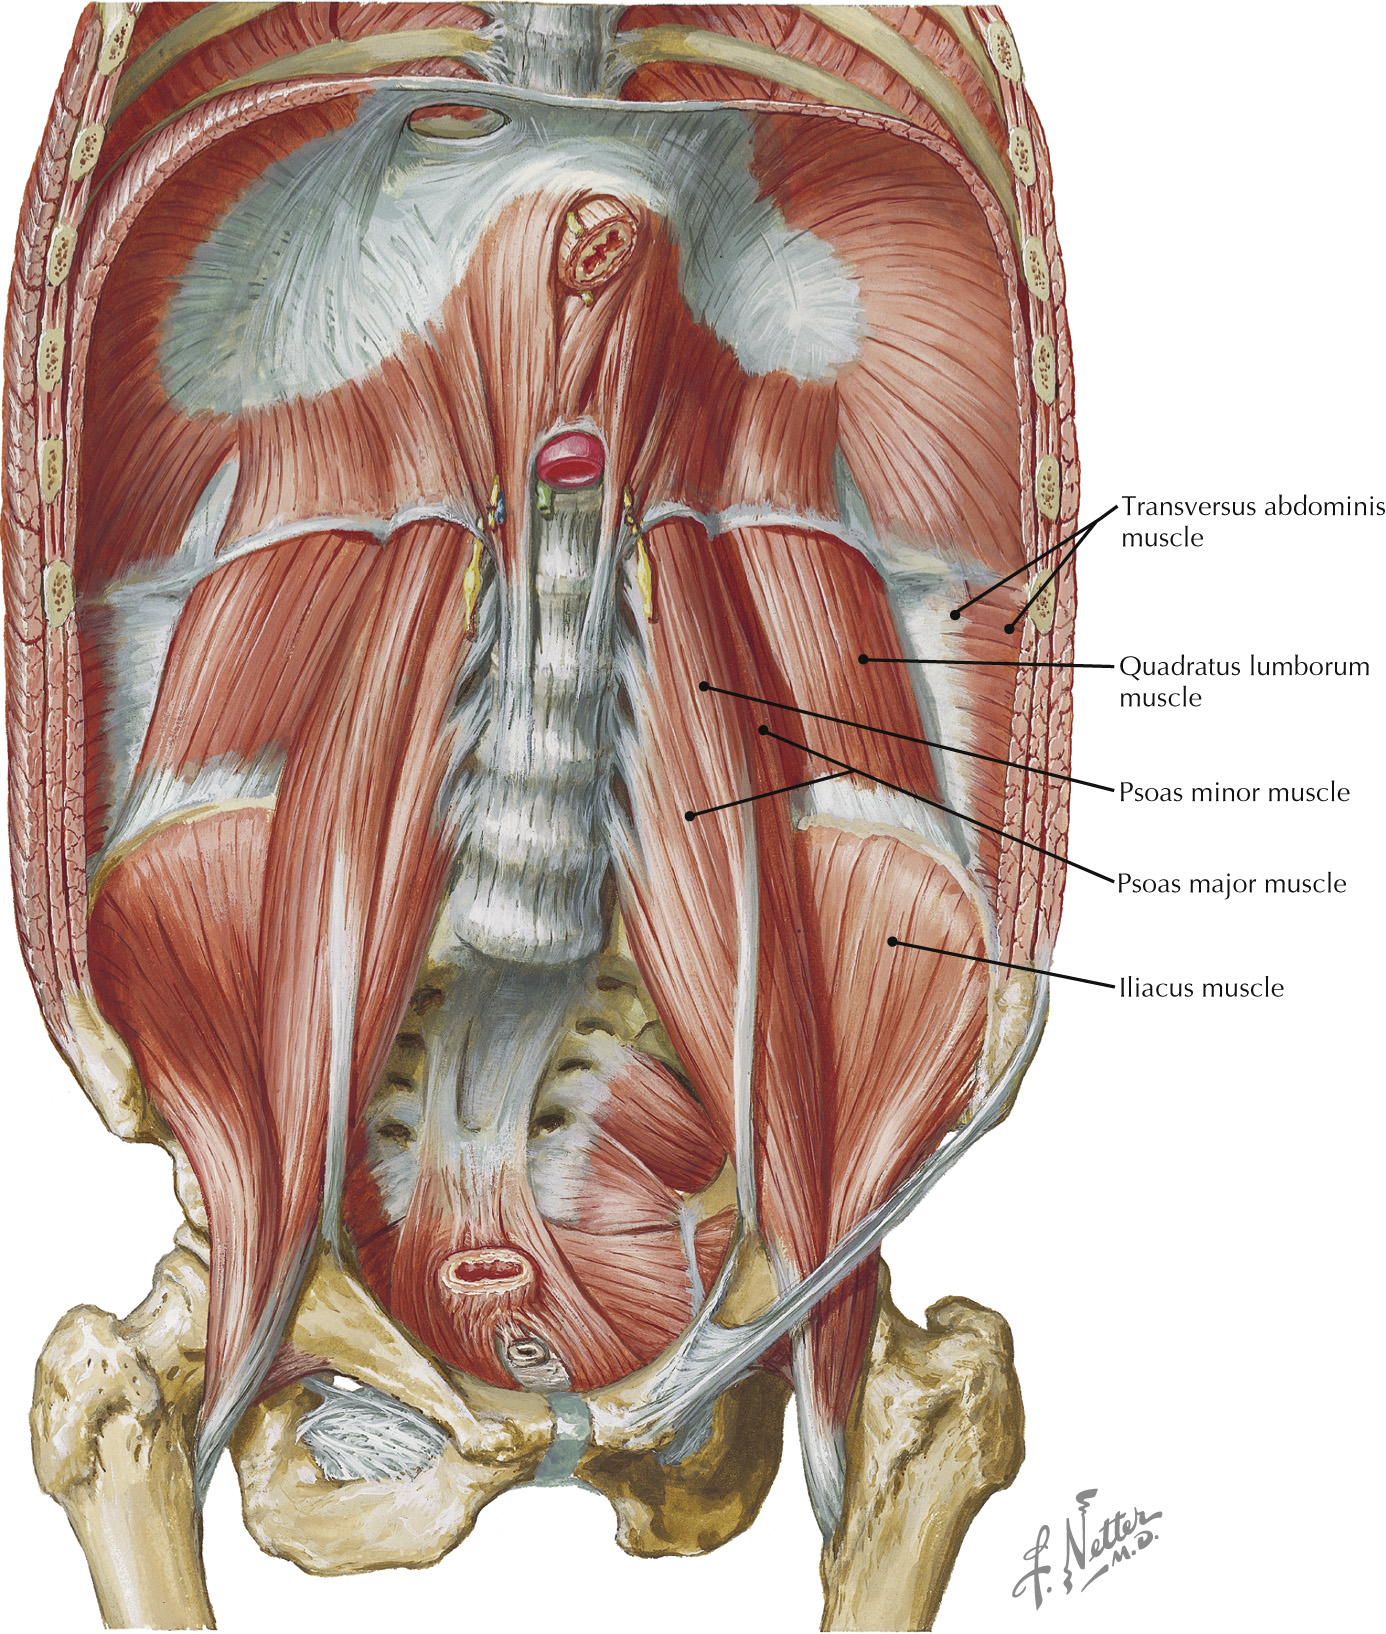 Muscles of the posterior abdominal wall